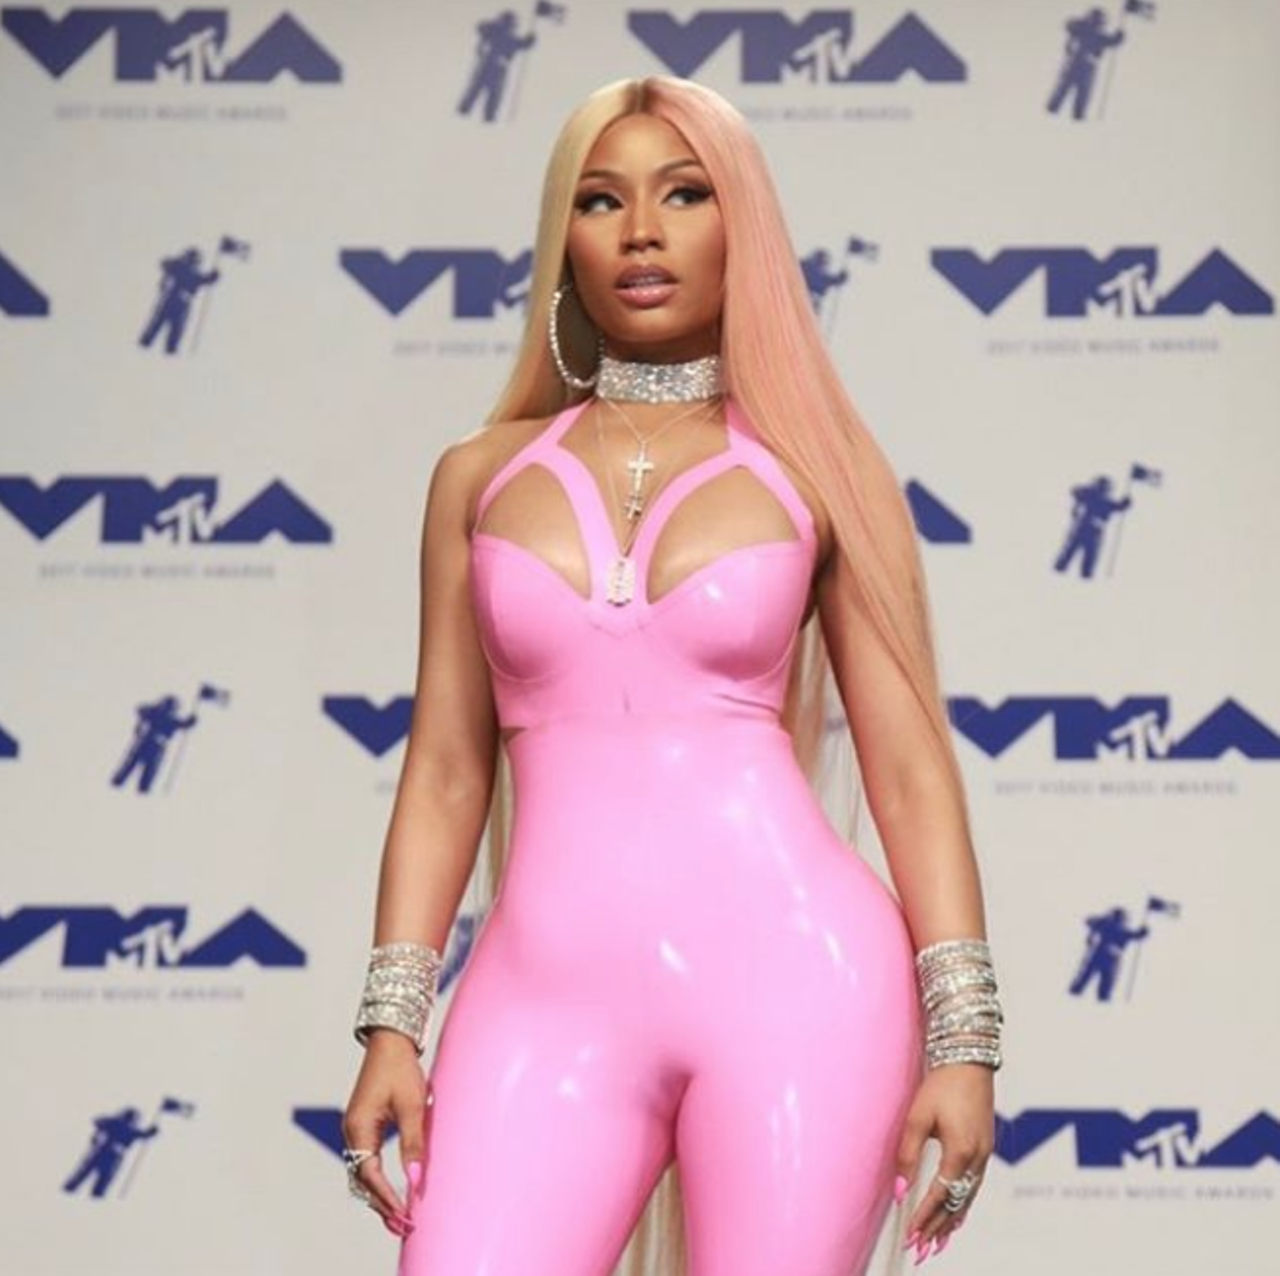 Nicki Minaj – "Big Daddy"
"Pulled up in something that look like a million ni**a put me up on
Ain't gotta sell it, but he say the pussy a drug that he re-up on
Spur of the moment, I ball like Ginobili, you bitches get D'ed up on 
You mad at me? Go get mad at your nigga 'fore I put my sneakers on"
Photo via Instagram / nickiminaj